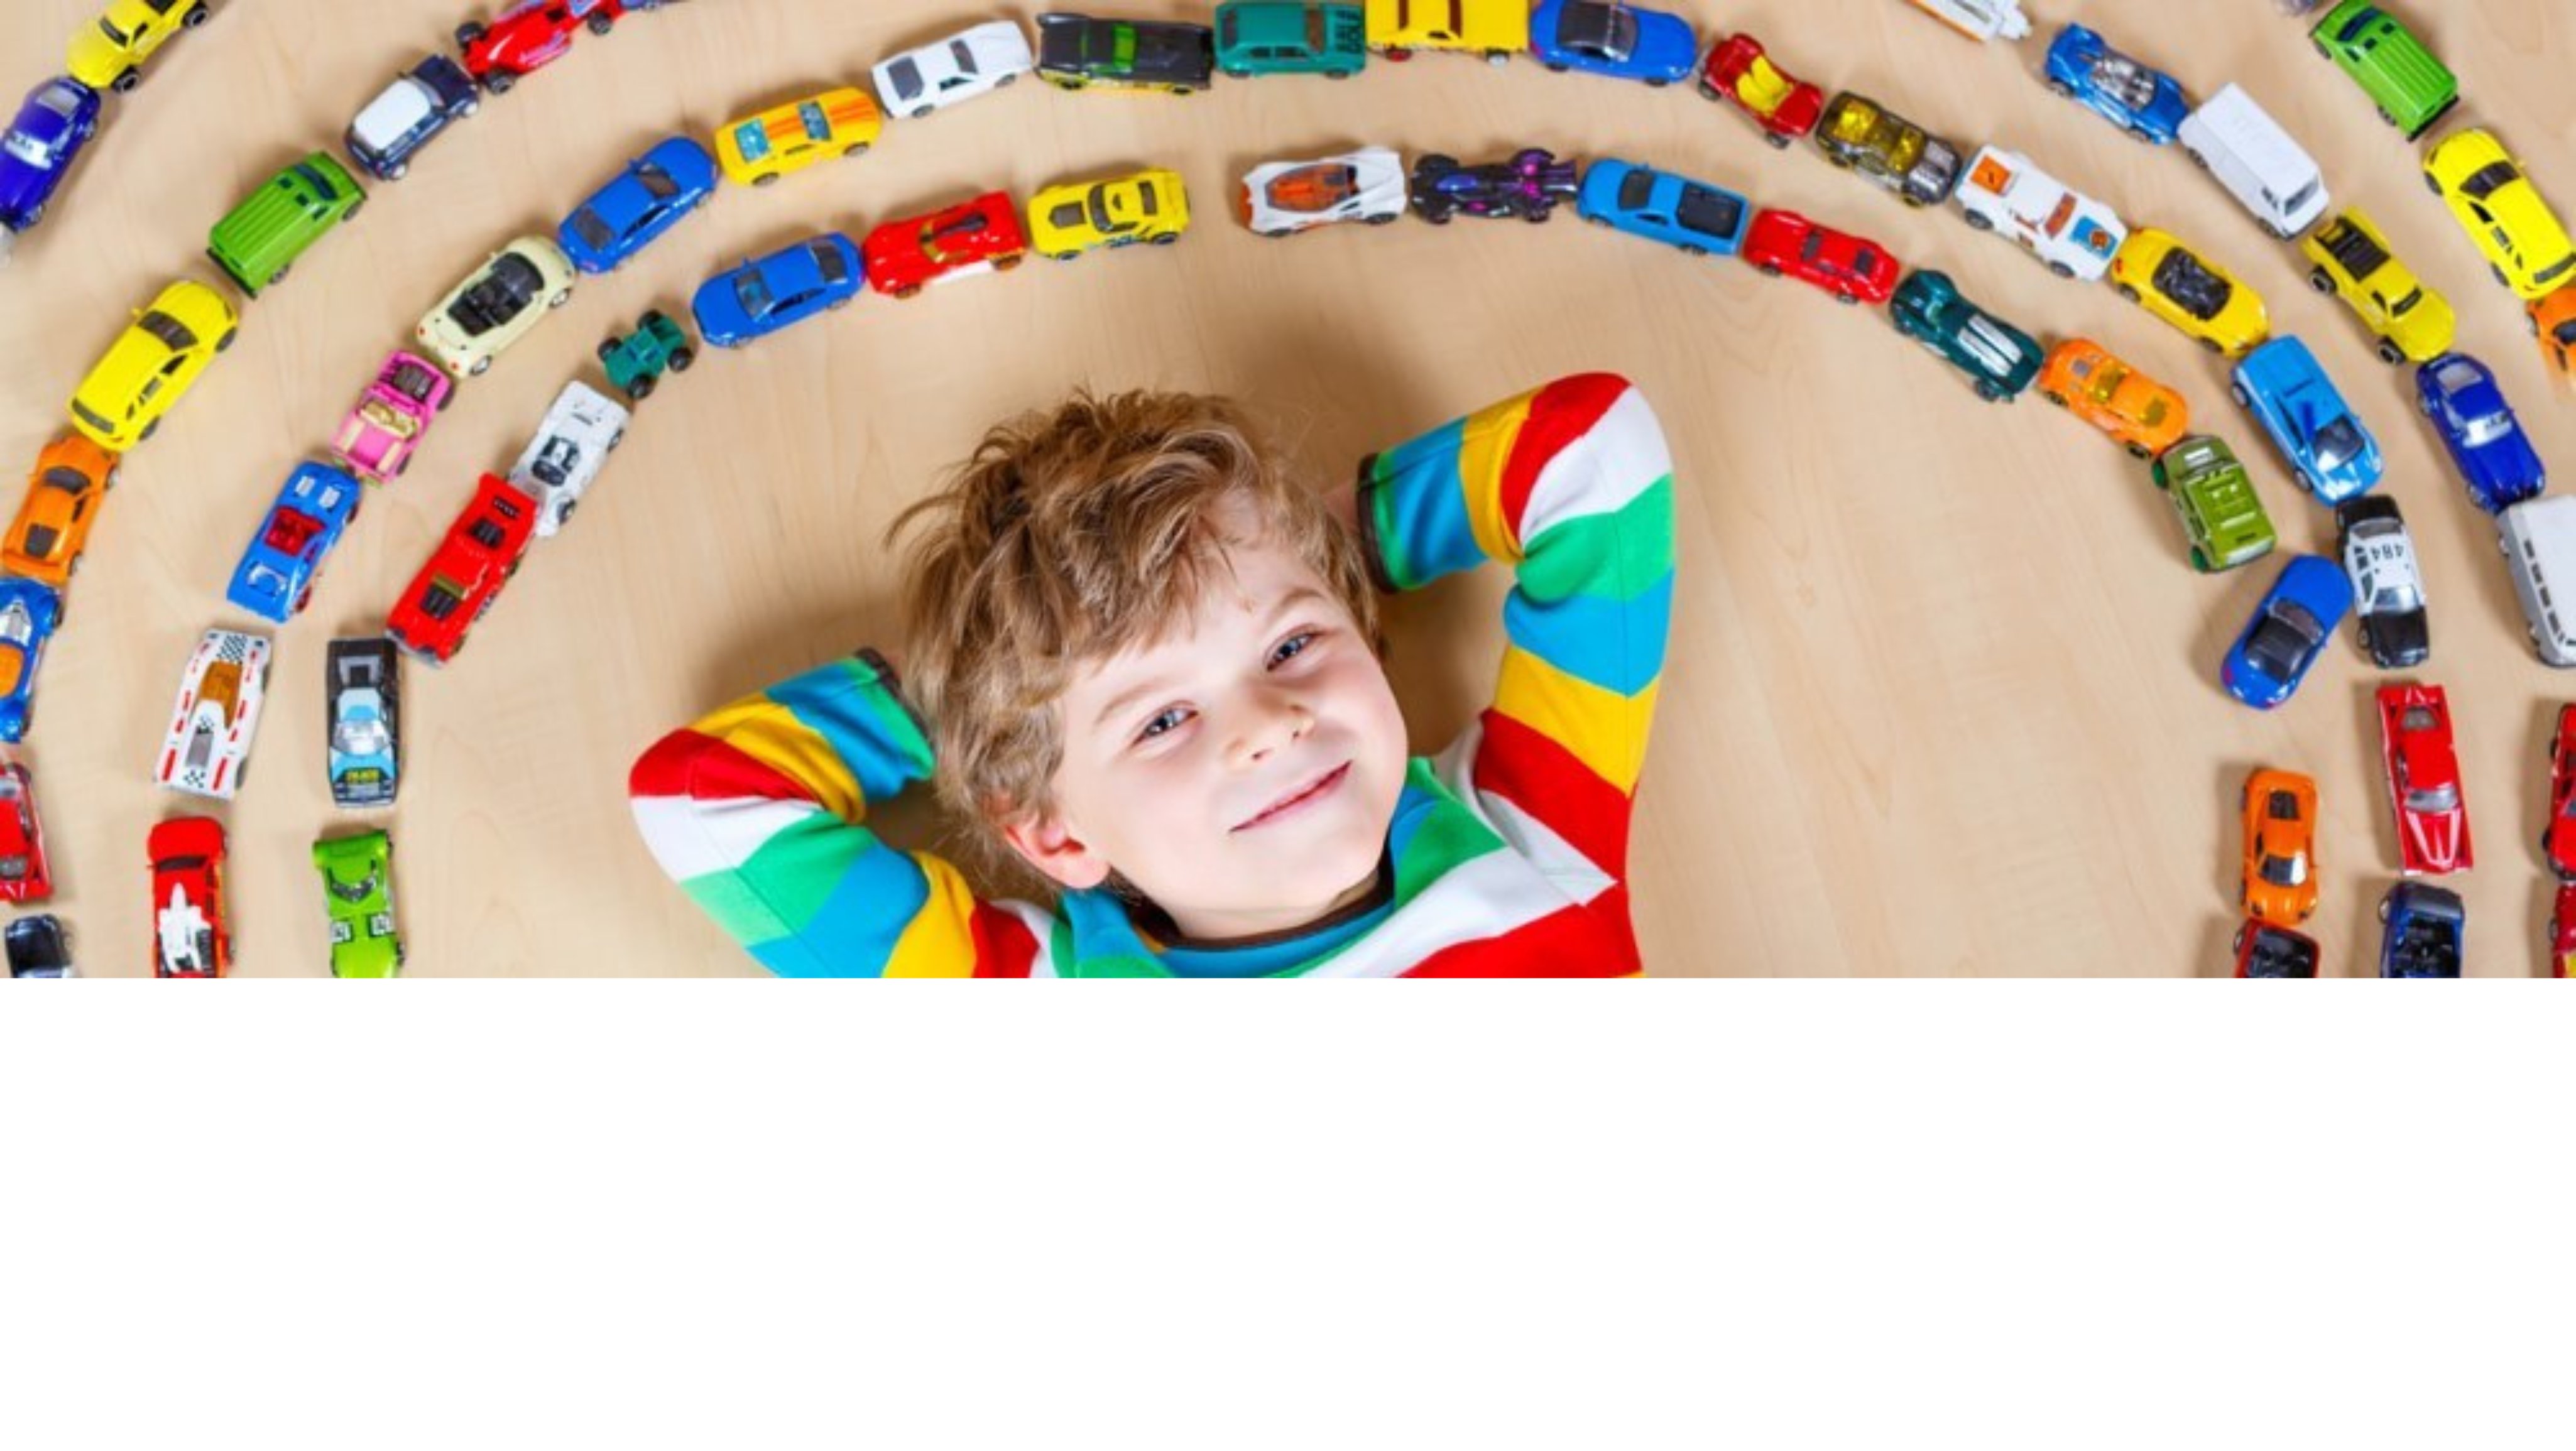 Child laying down with toy cars